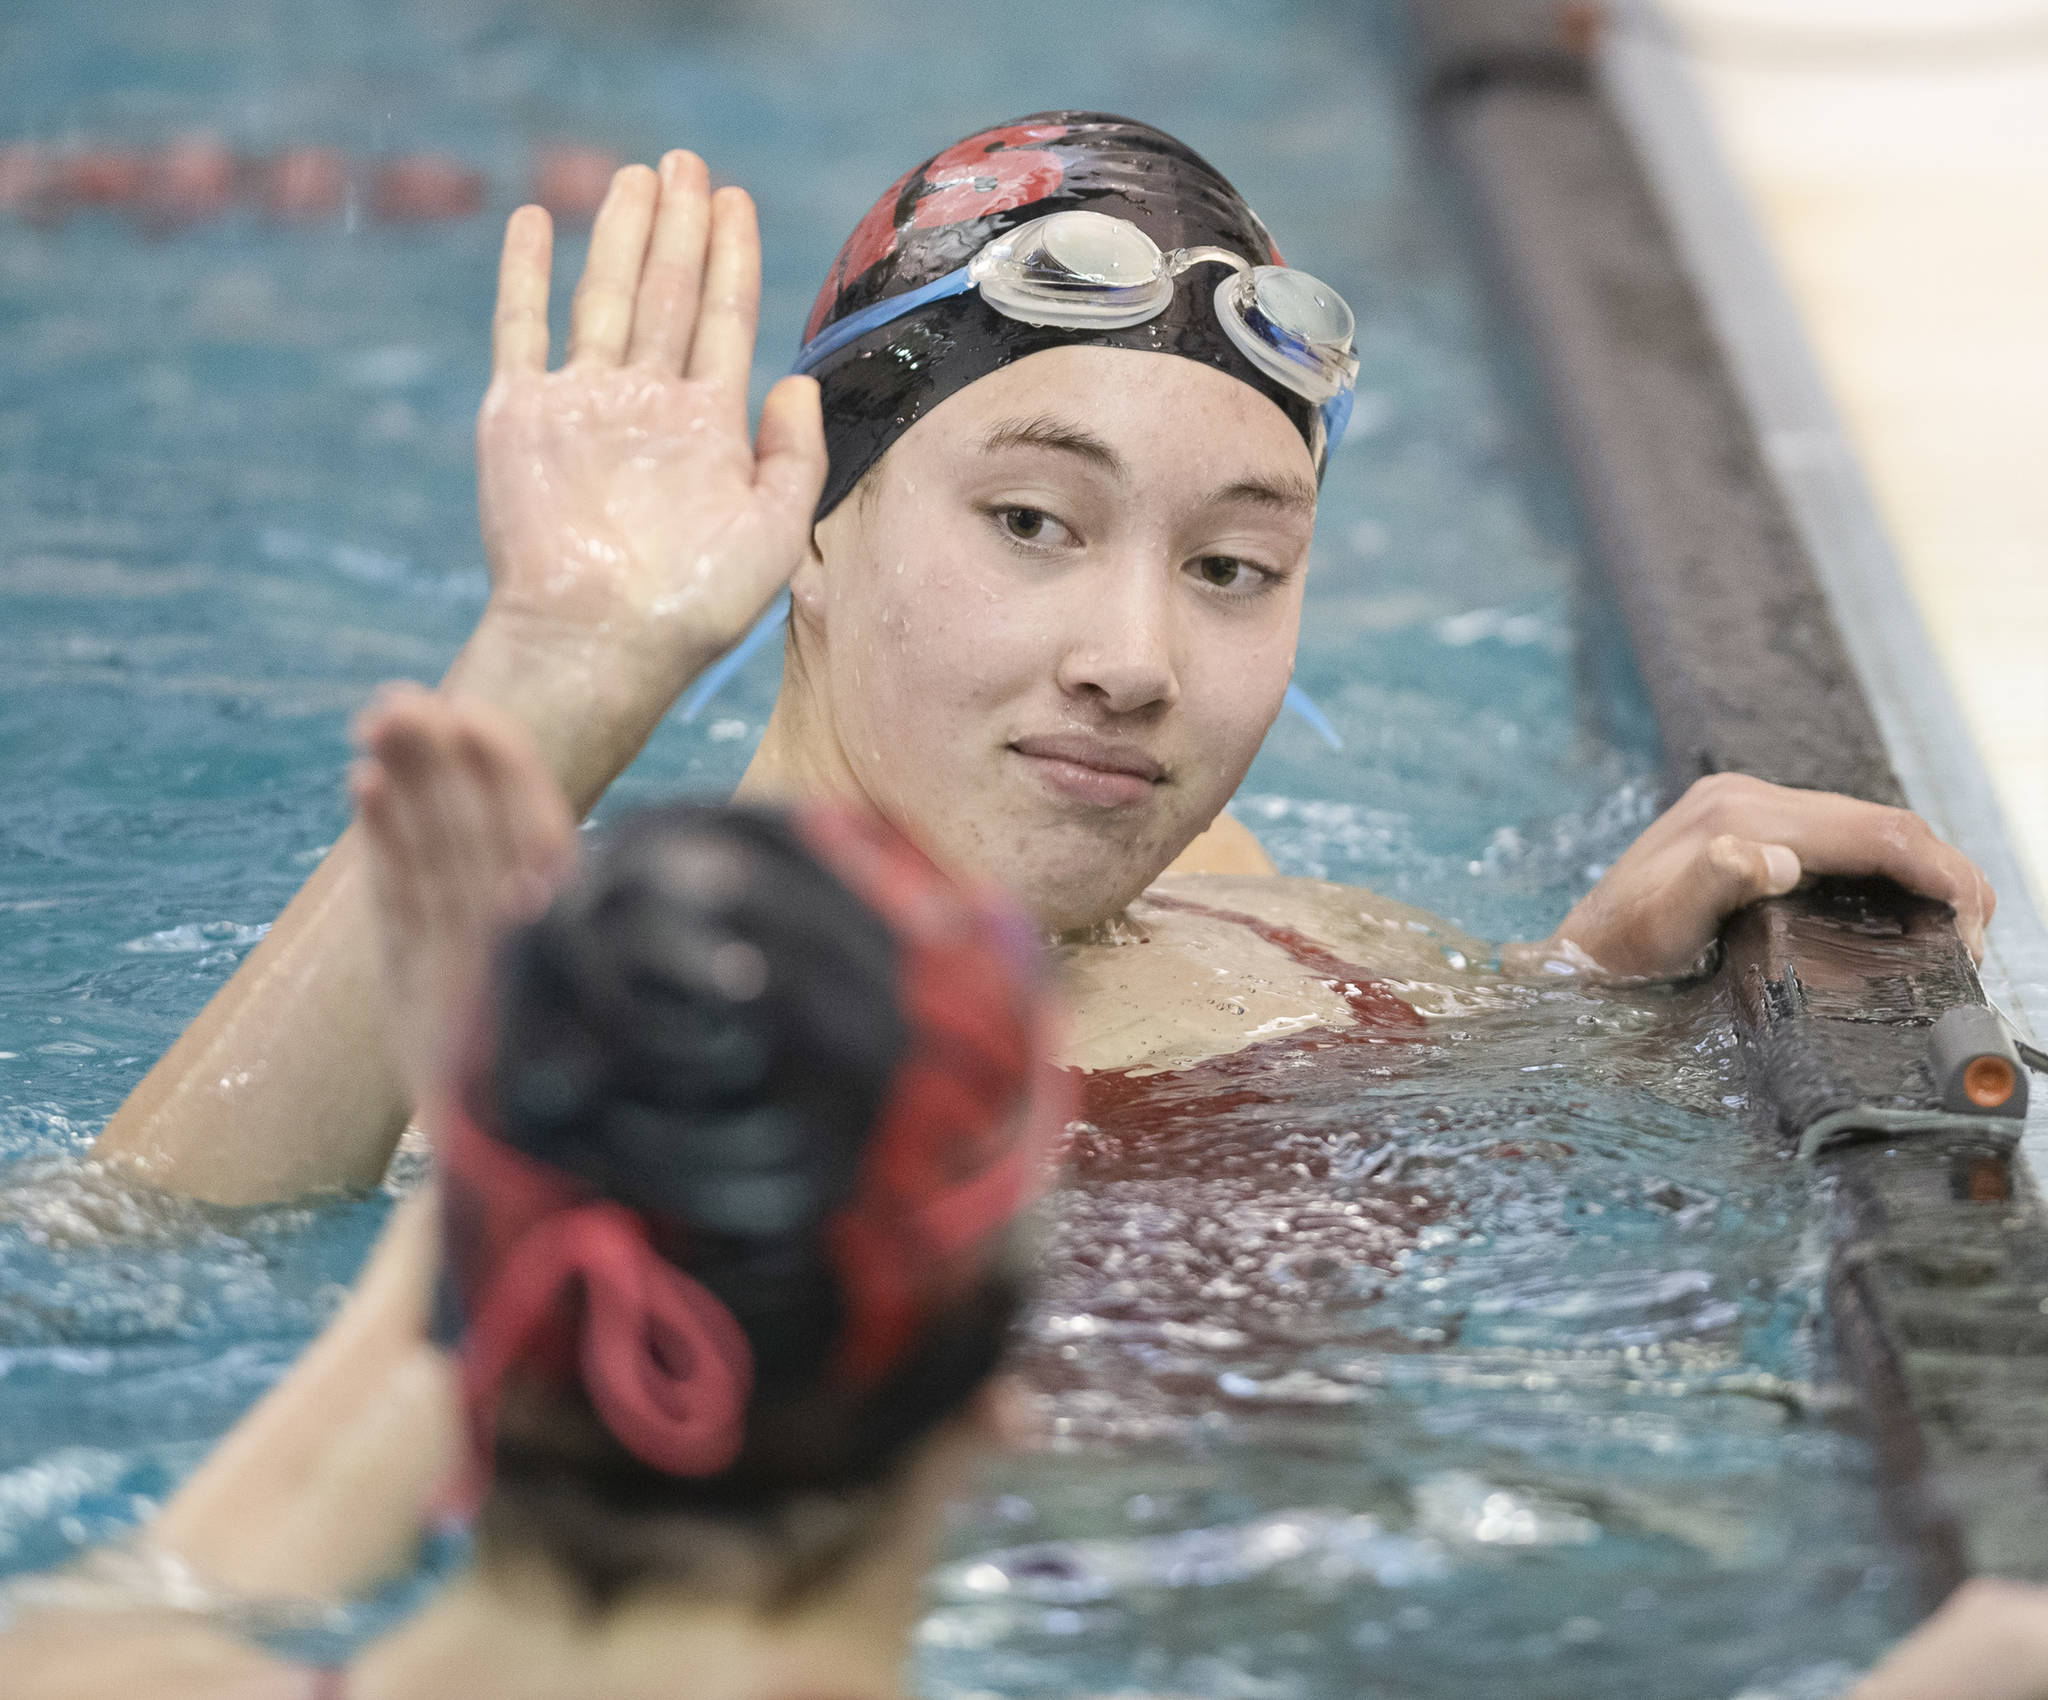 Juneau-Douglas’ Addy Mallot, top, gives a high-five to teammate Mesa Moran after competing in the 50 Yard Freestyle at the Juneau Invitational Swim Meet at the Dimond Park Aquatic Center on Friday, Sept. 20, 2019. (Michael Penn | Juneau Empire)